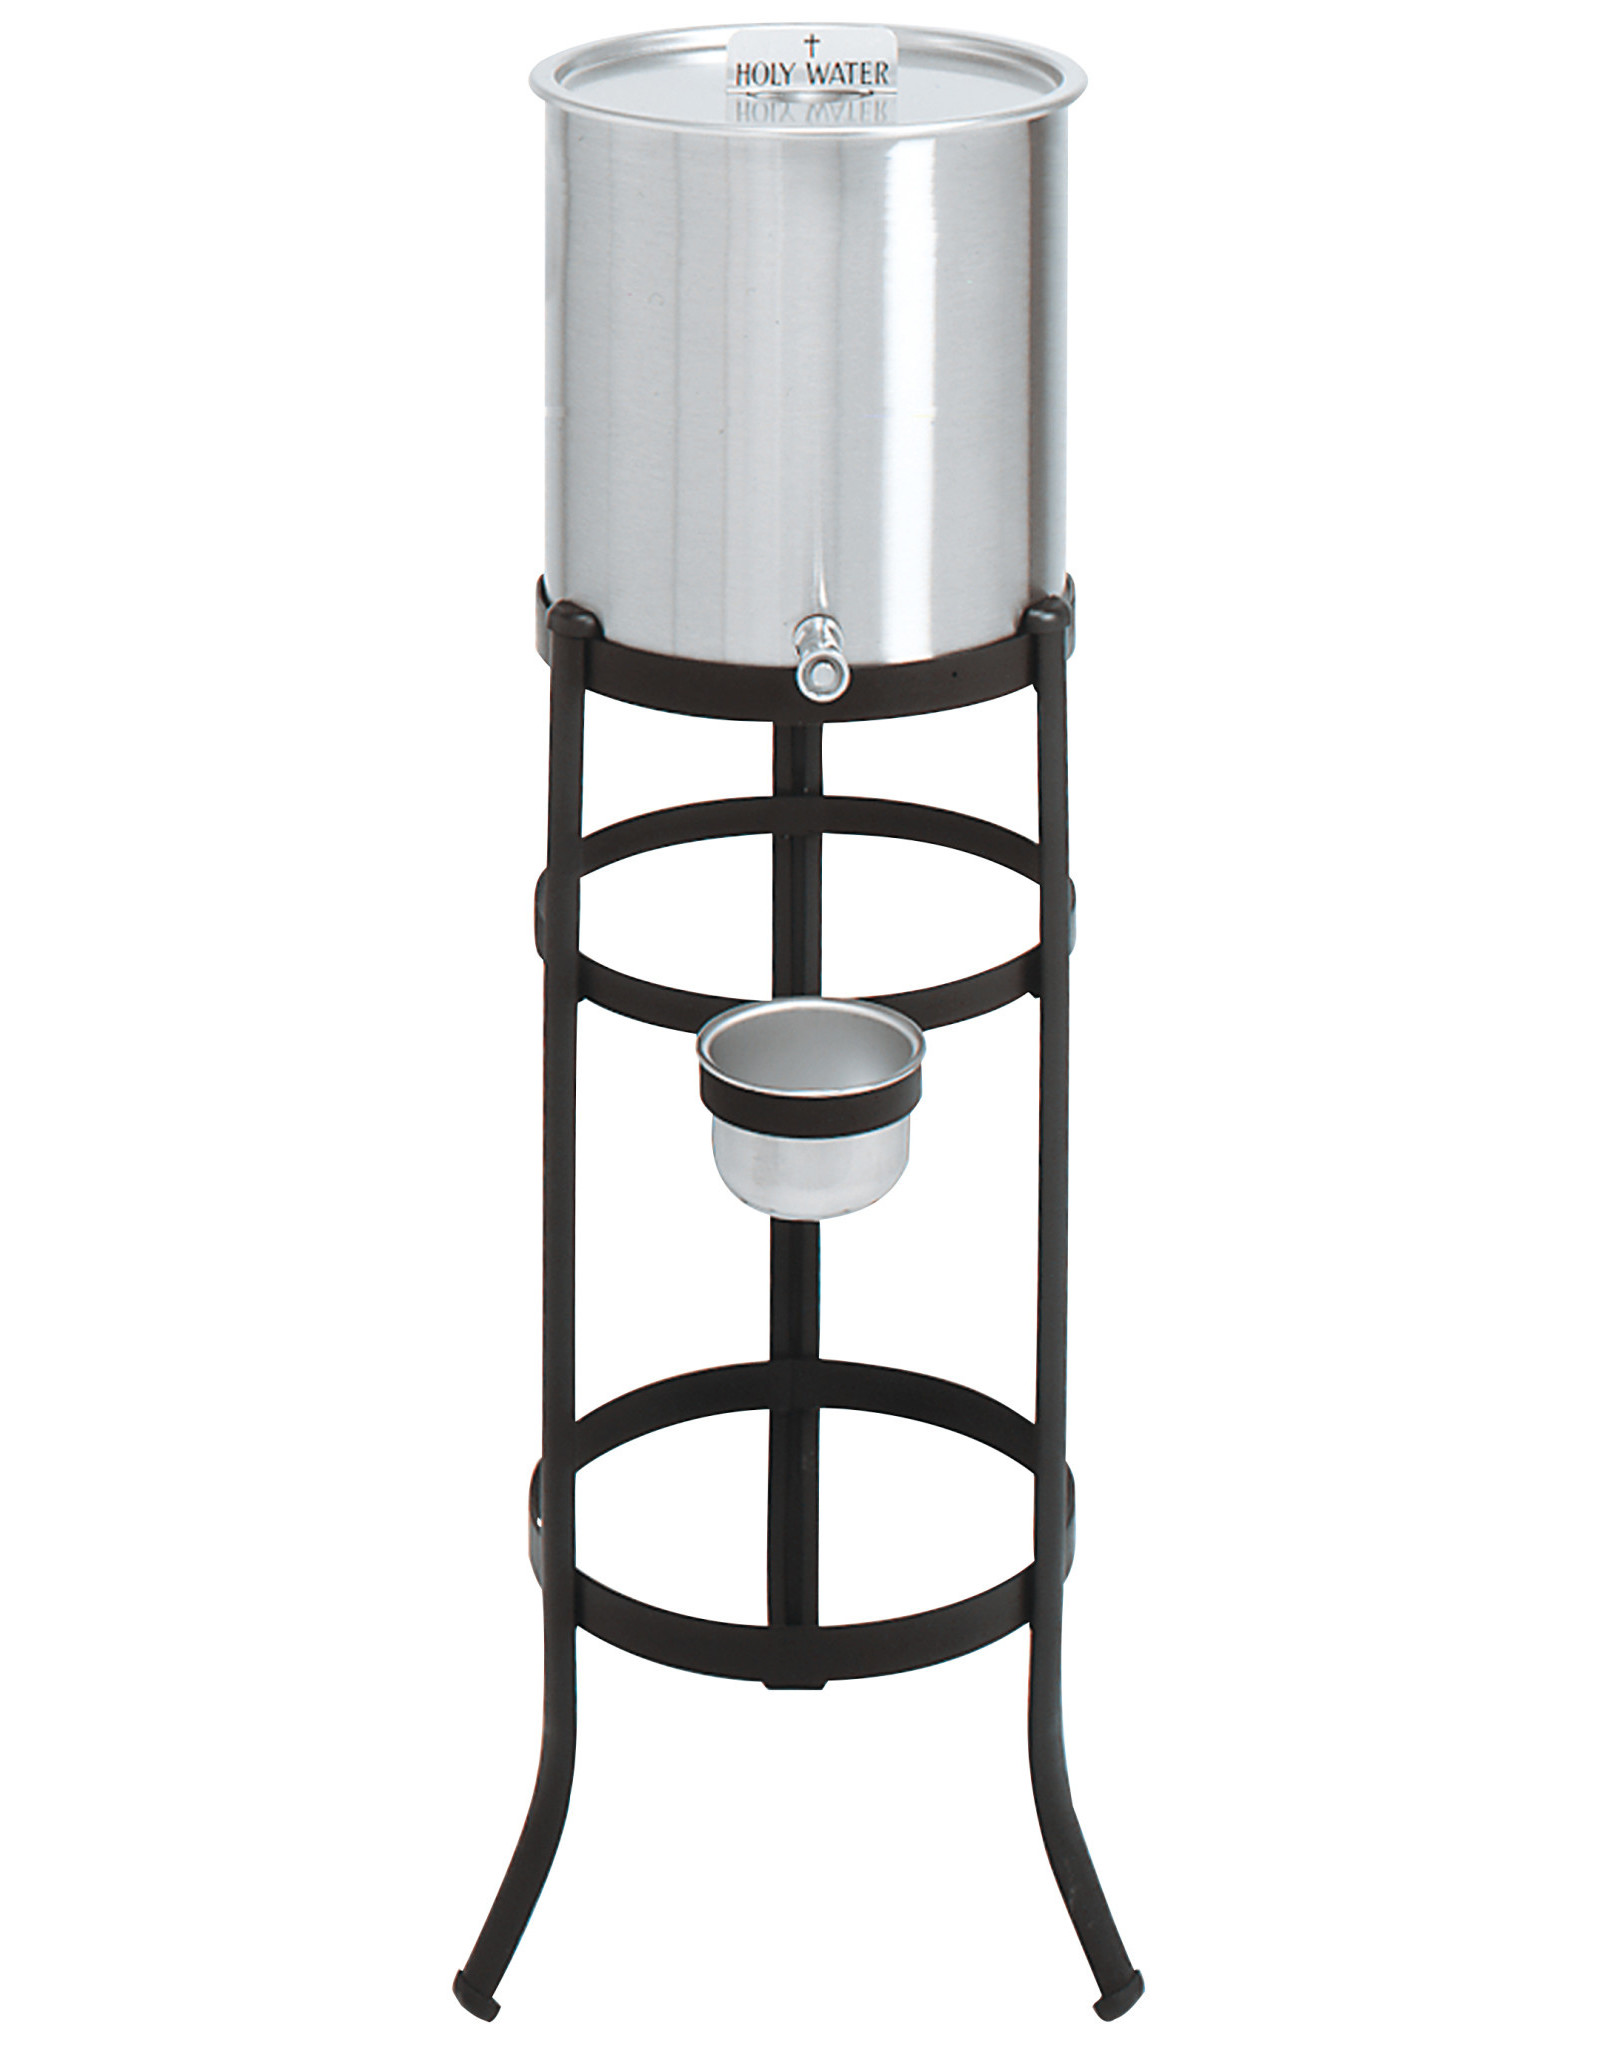 Holy Water Tank & Stand K445-6